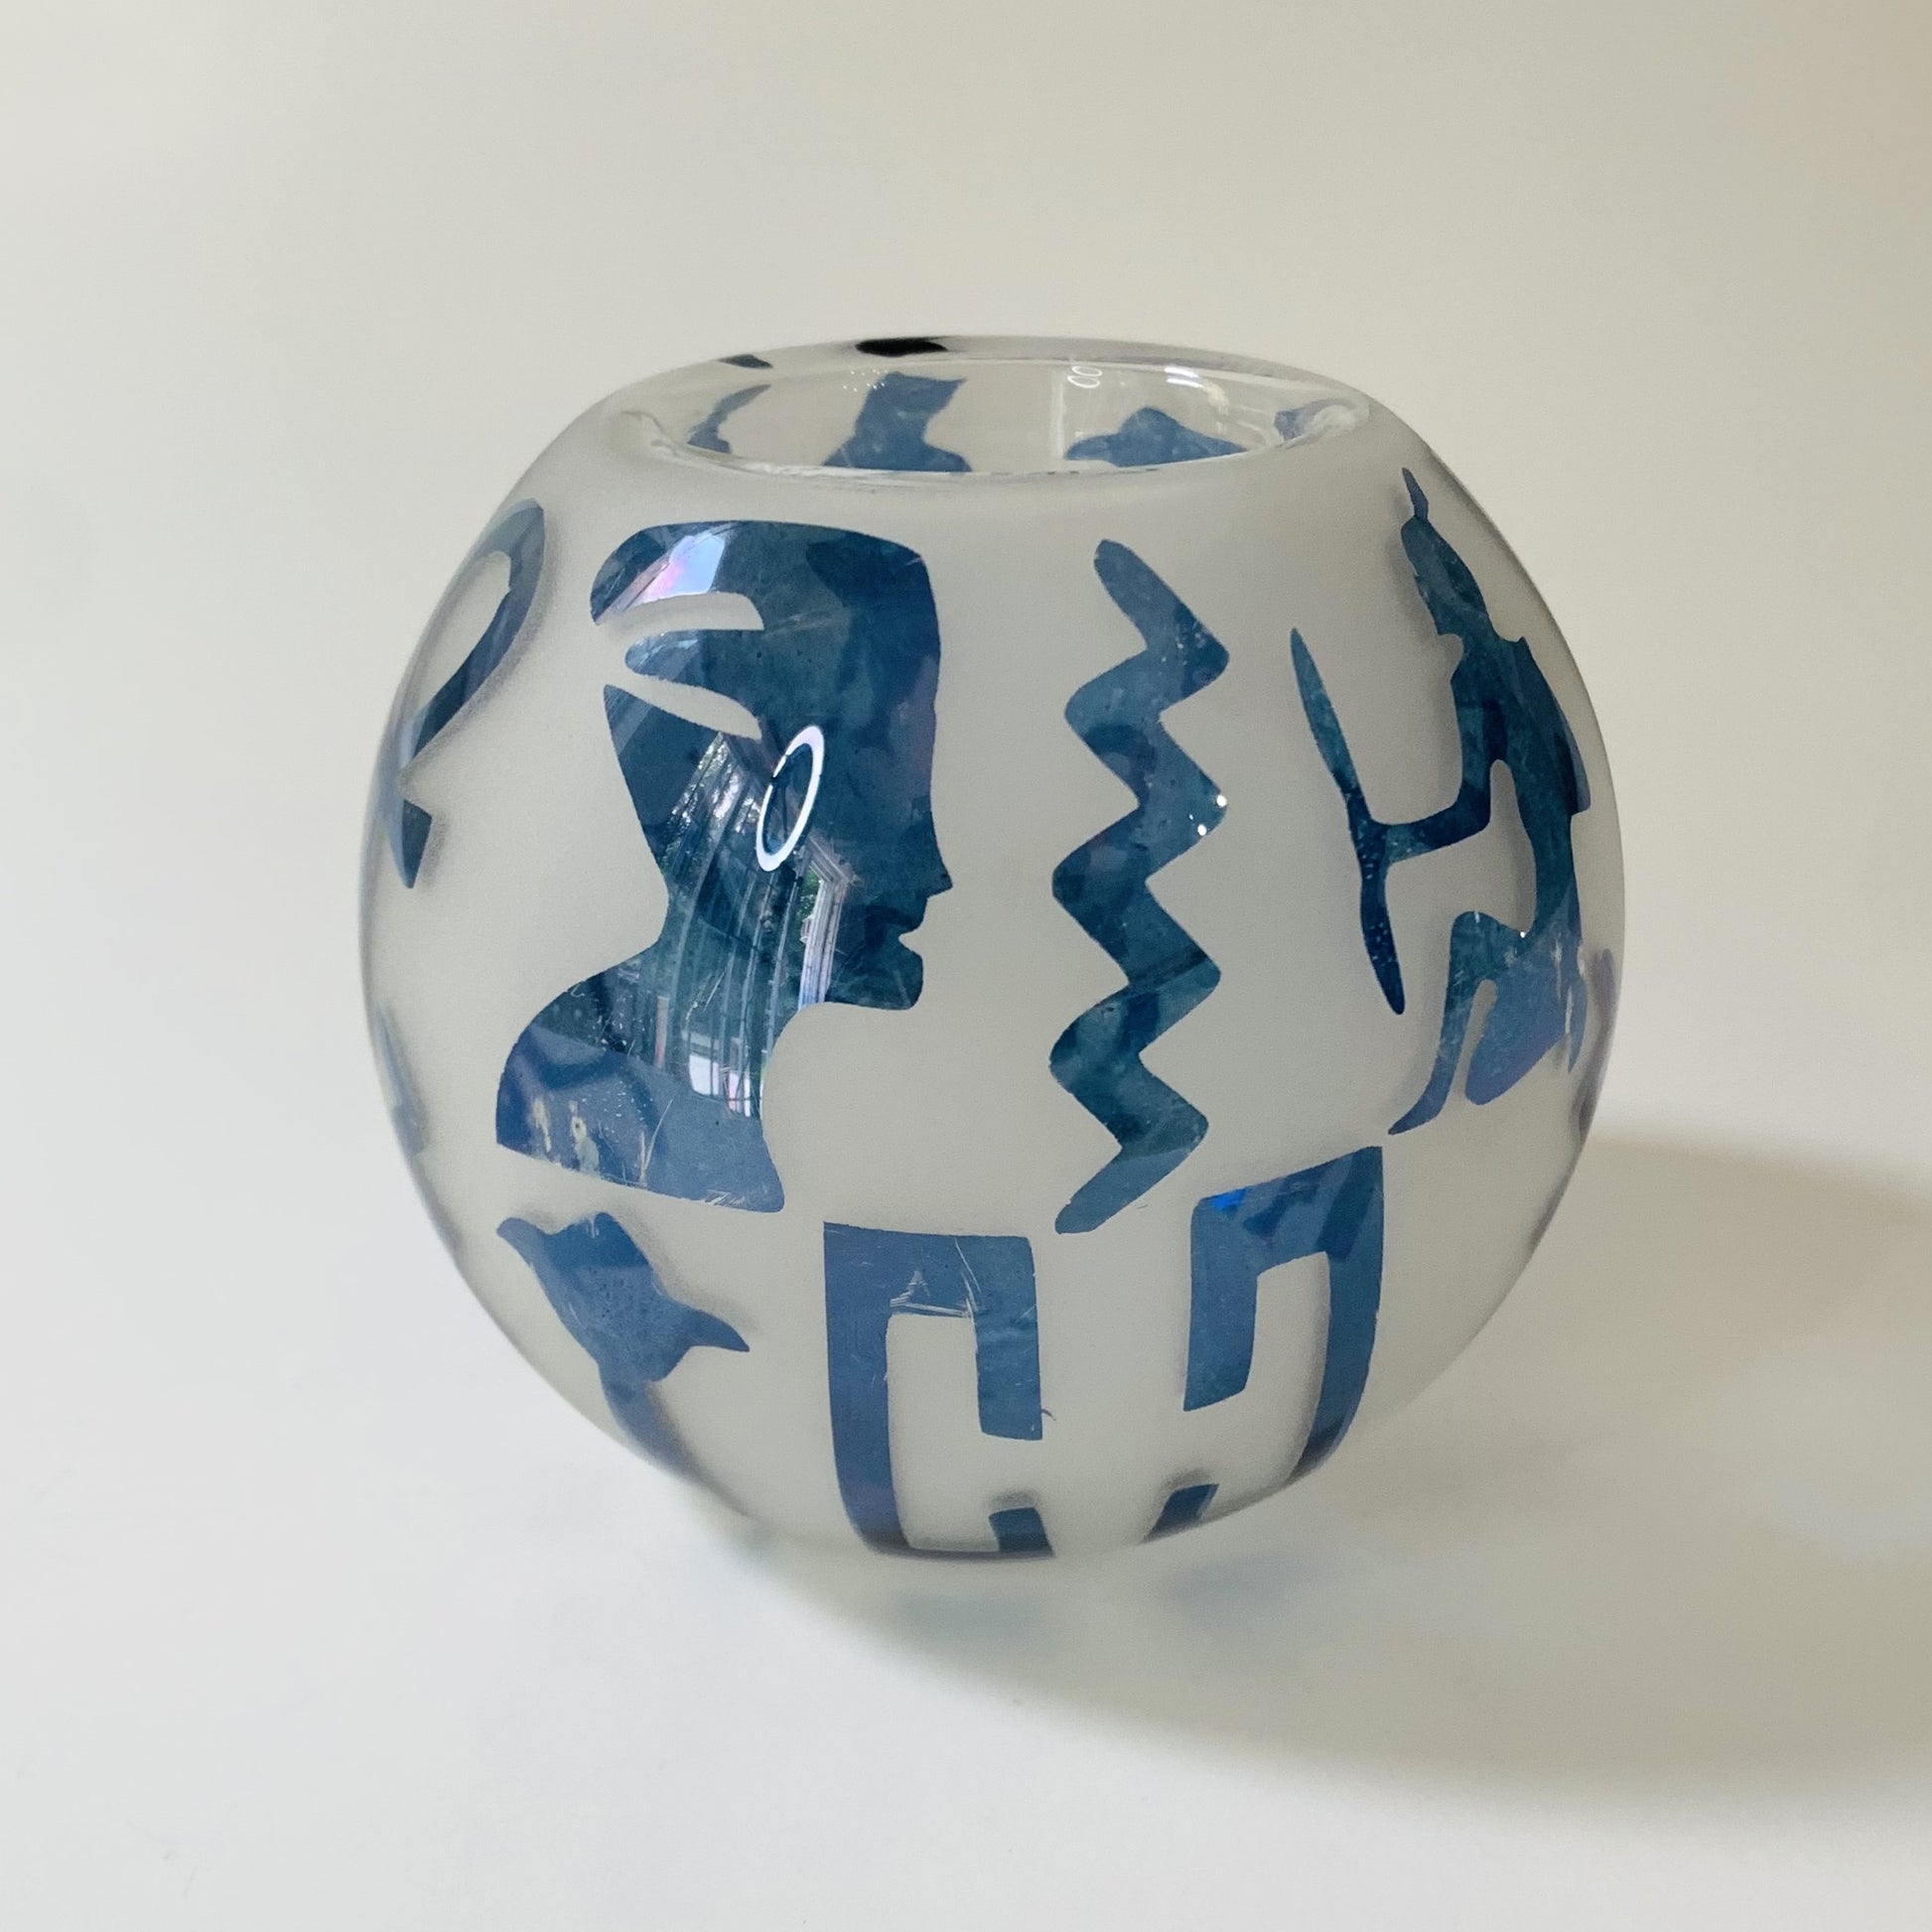 Blown Glass Candle Holder - Hieroglyphs in Blue